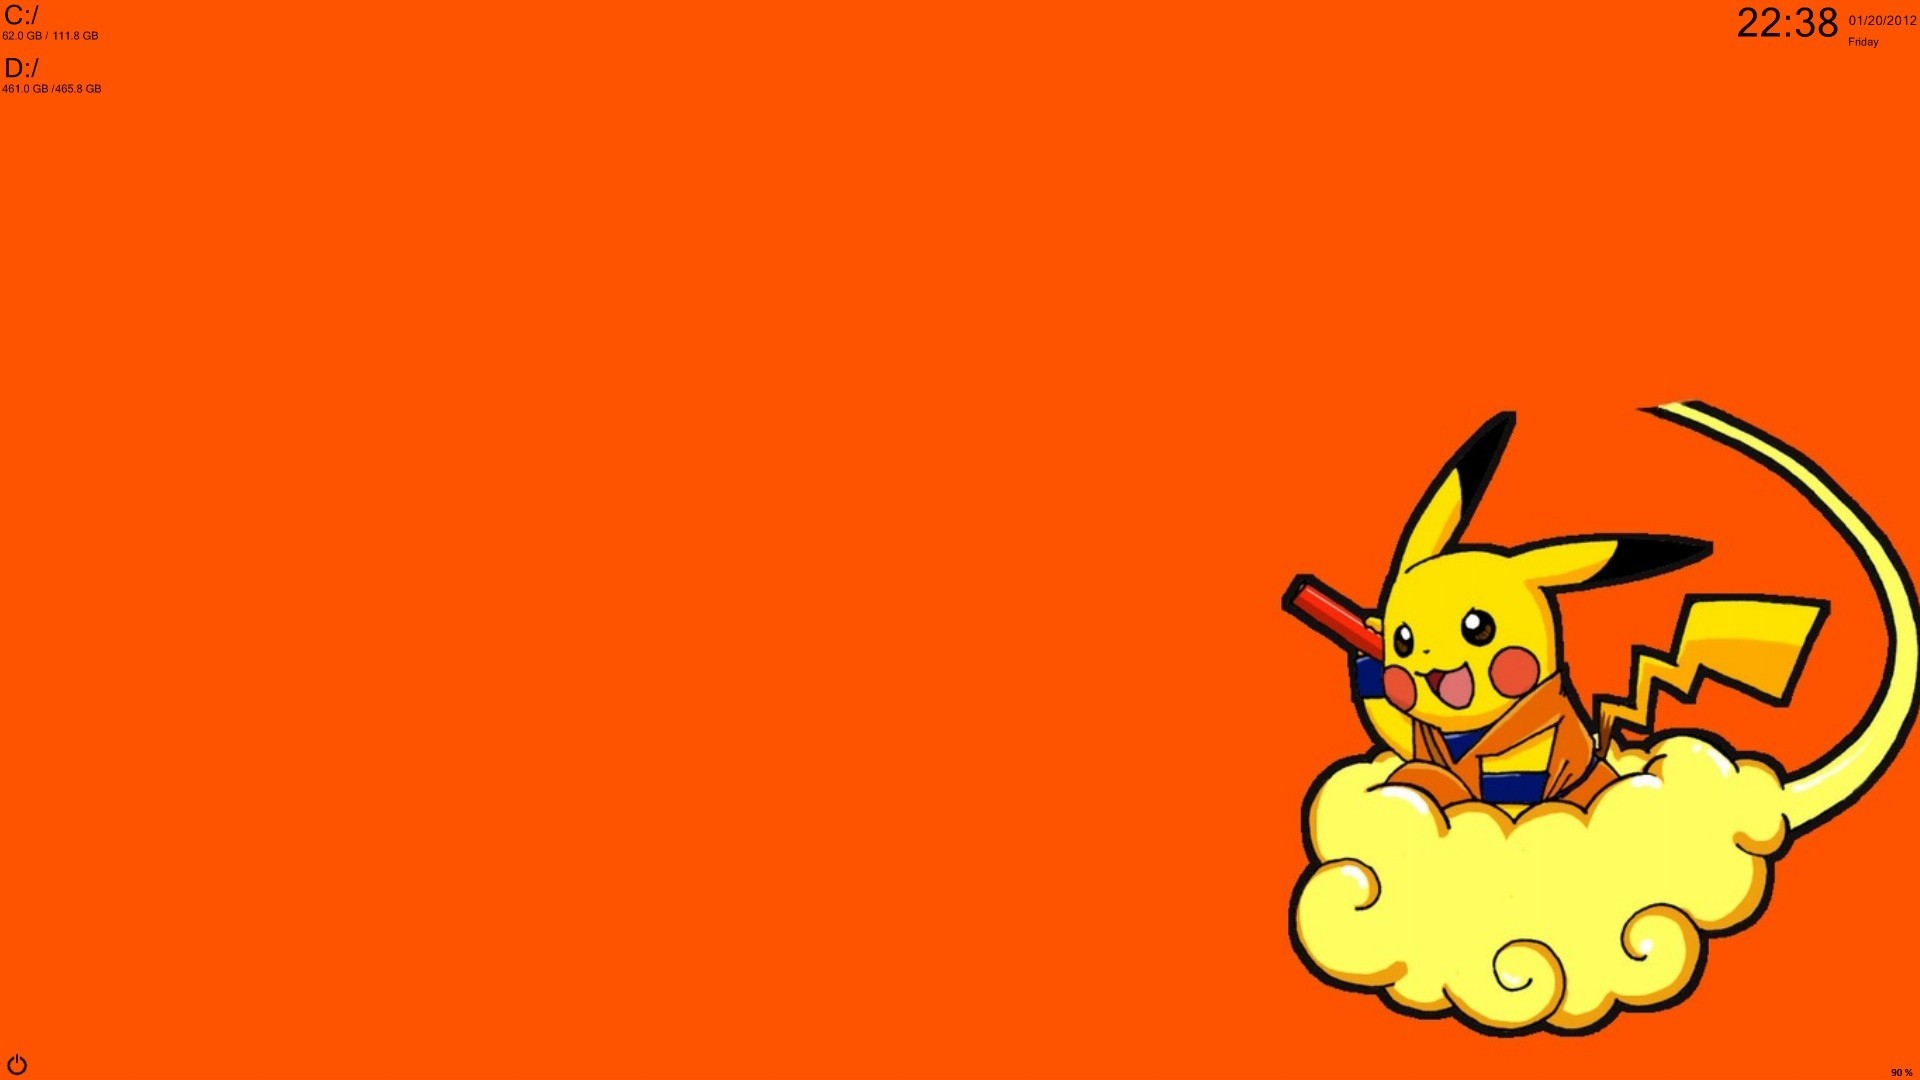 1920x1080 39 best Pokemon images on Pinterest | Pikachu, Wallpapers and Chibi ...